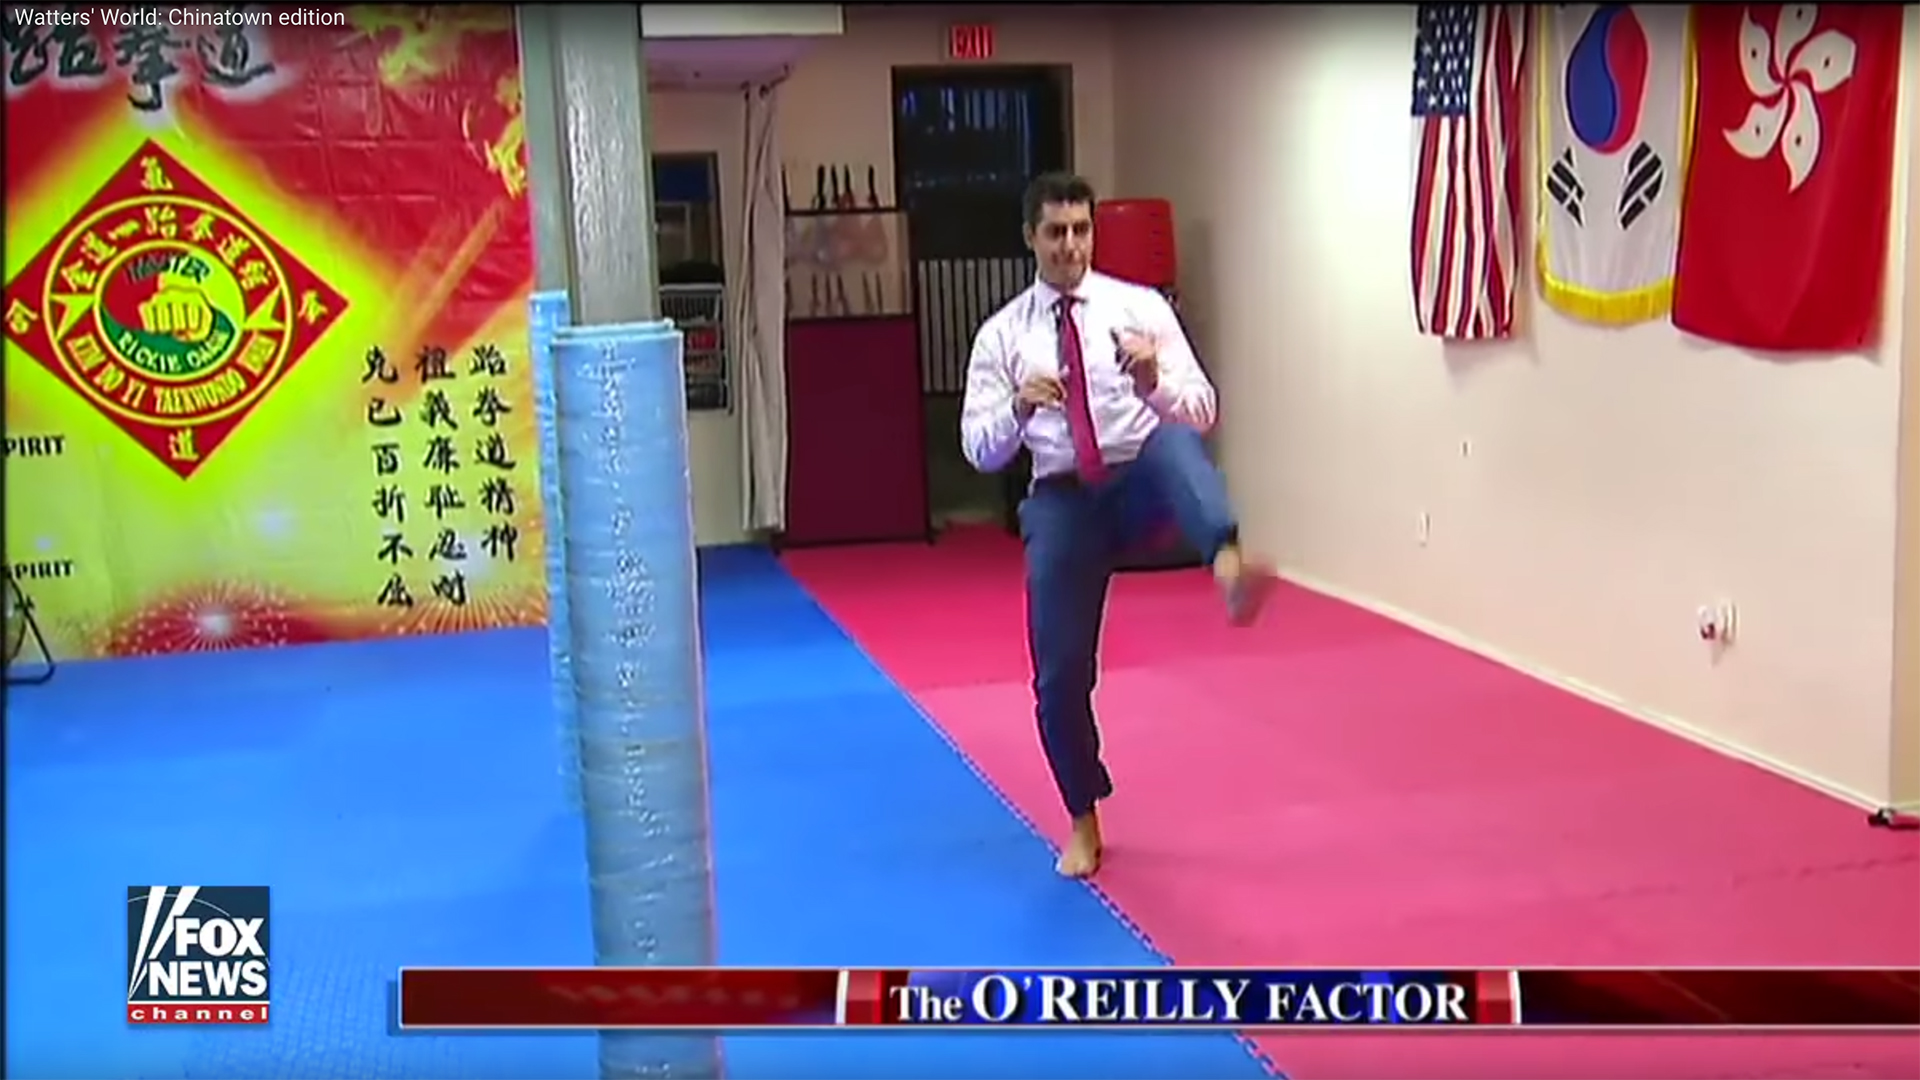 Screenshot from Jesse Watters segment in New York City's Chinatown that aired on Fox News.